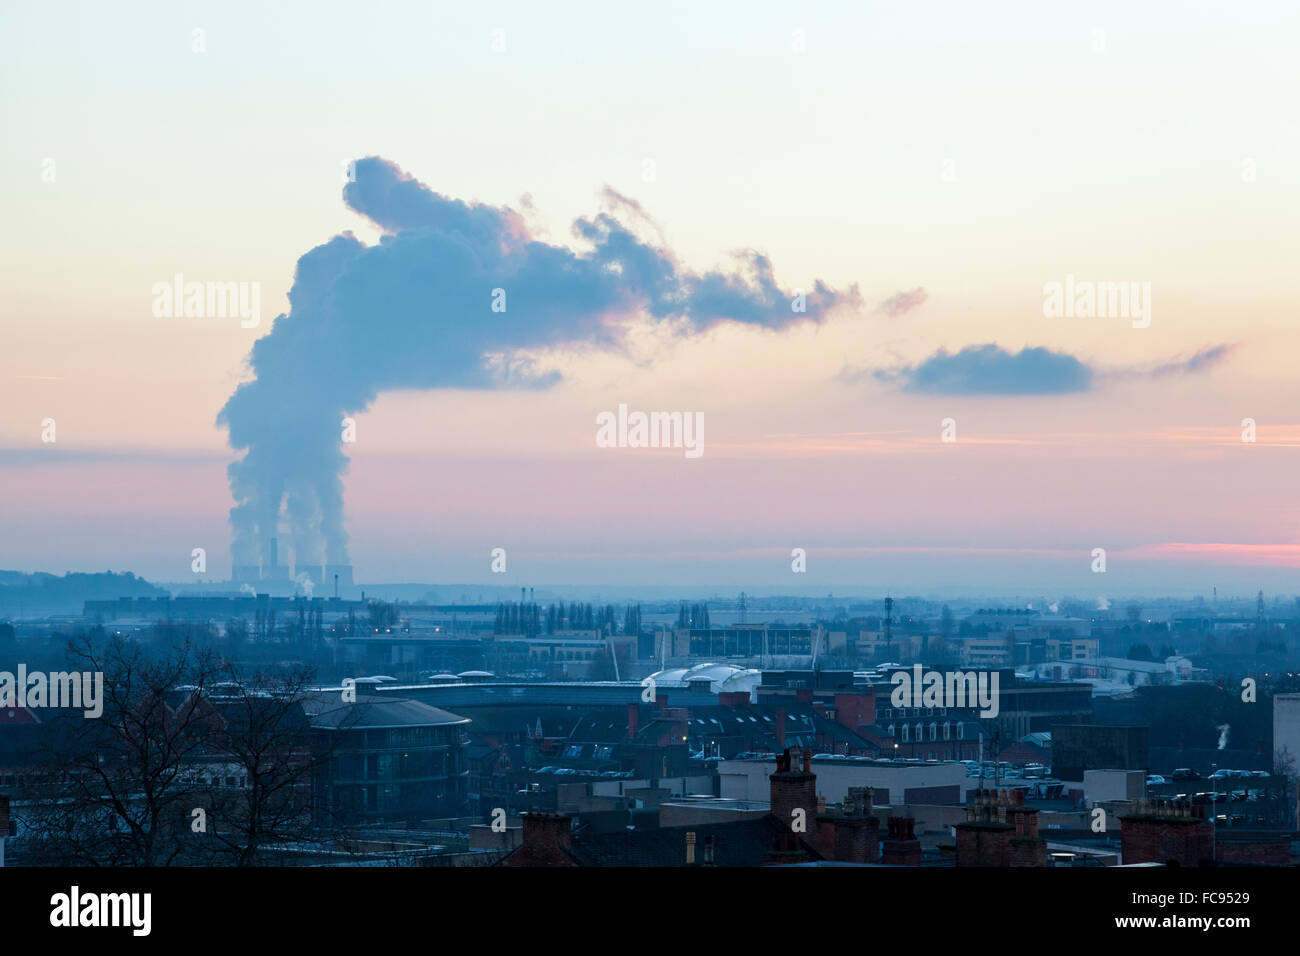 Climate change. Smoke emissions from Ratcliffe on Soar power station, Nottinghamshire, with the city of Nottingham in the foreground. England, UK Stock Photo